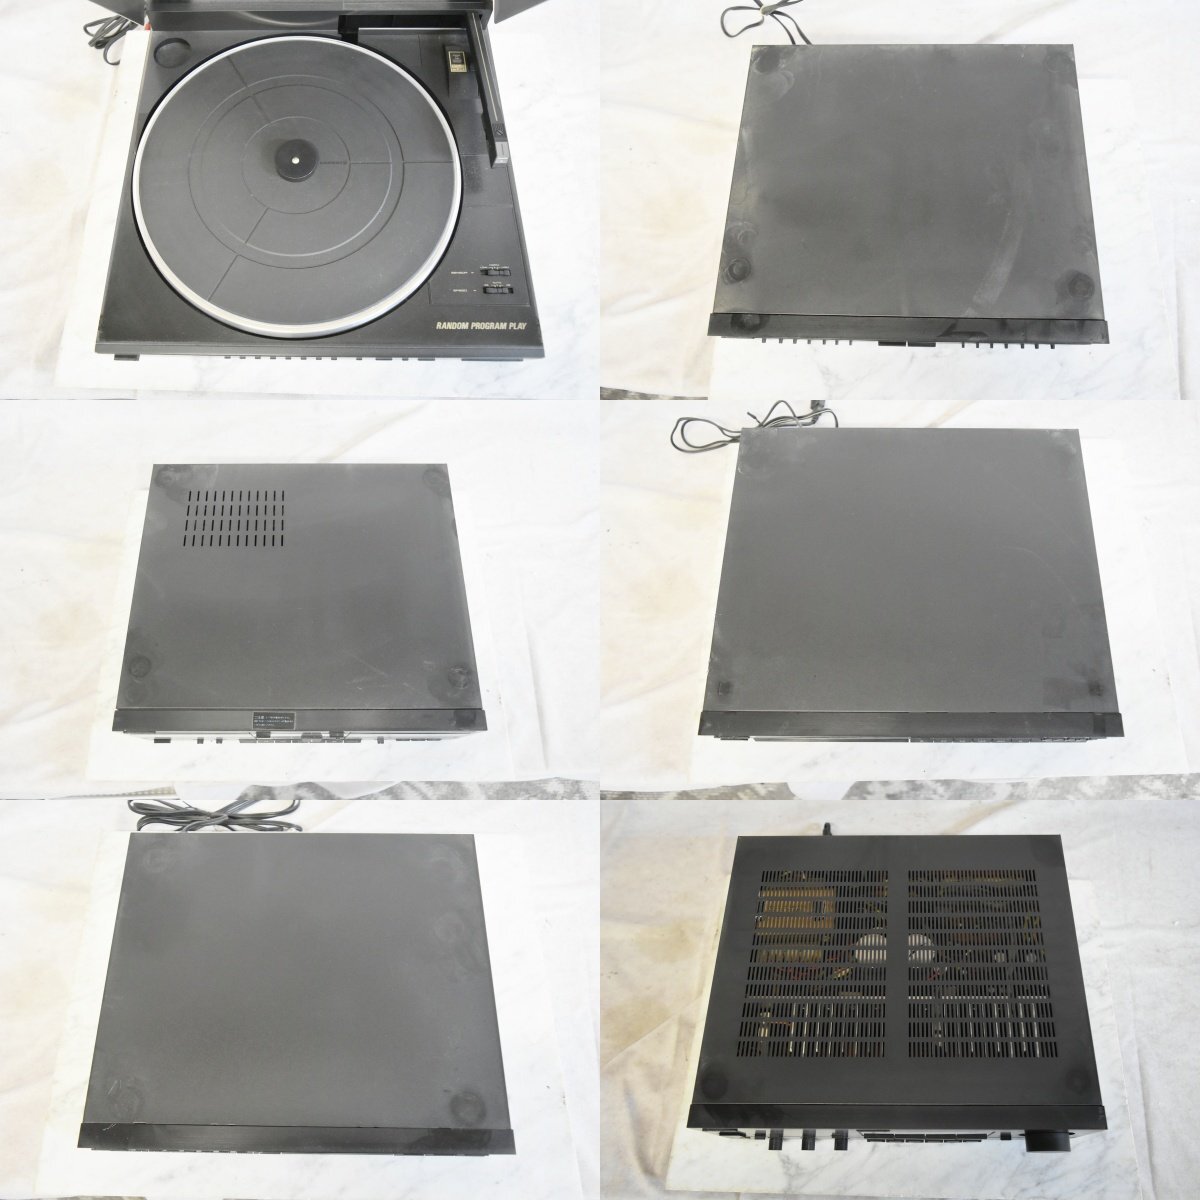 K*[ Junk ]PIONEER PL-X720 A-X820 GR-X520 CT-X720WR PD-X720 S-X820 F-X720 system player Pioneer 